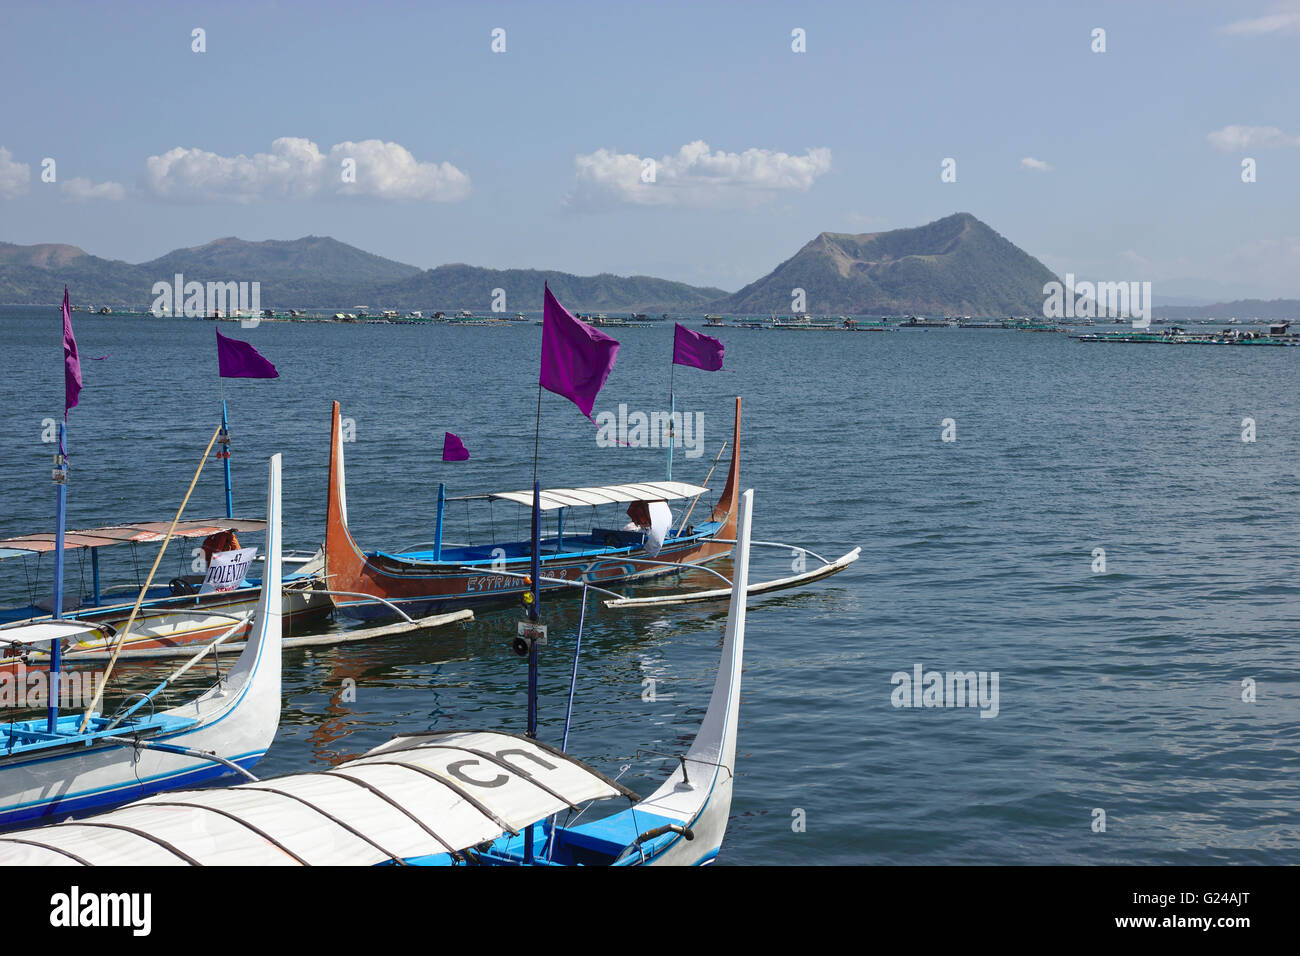 Boats on the shore of Lake Taal, with Volcano Island in the back, Luzon, Philippines Stock Photo